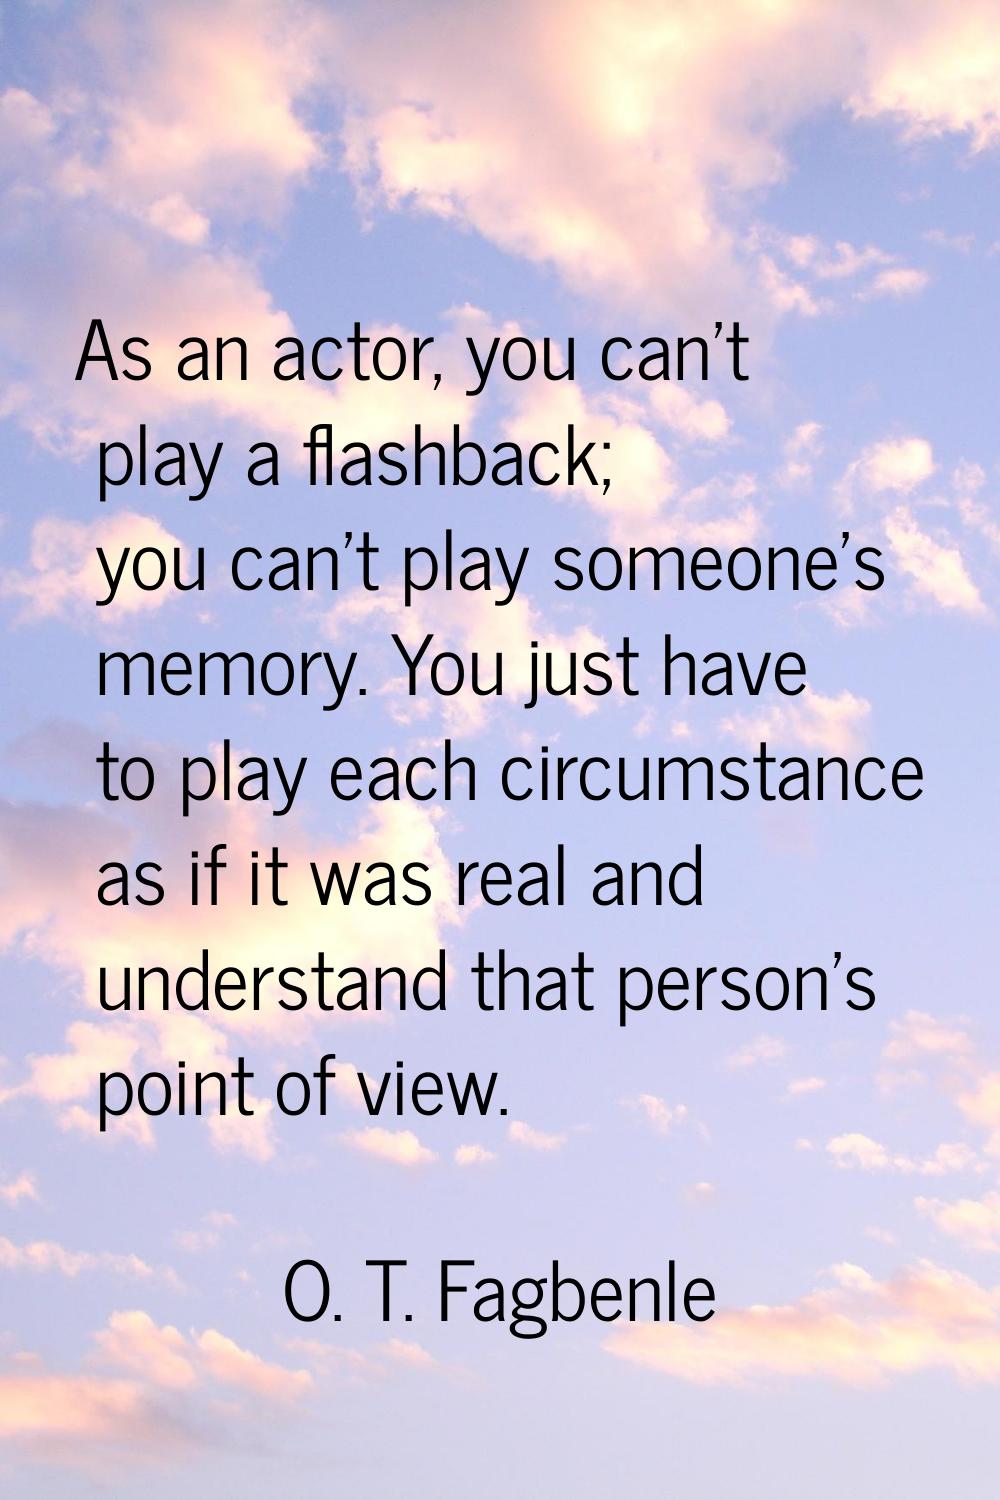 As an actor, you can't play a flashback; you can't play someone's memory. You just have to play eac